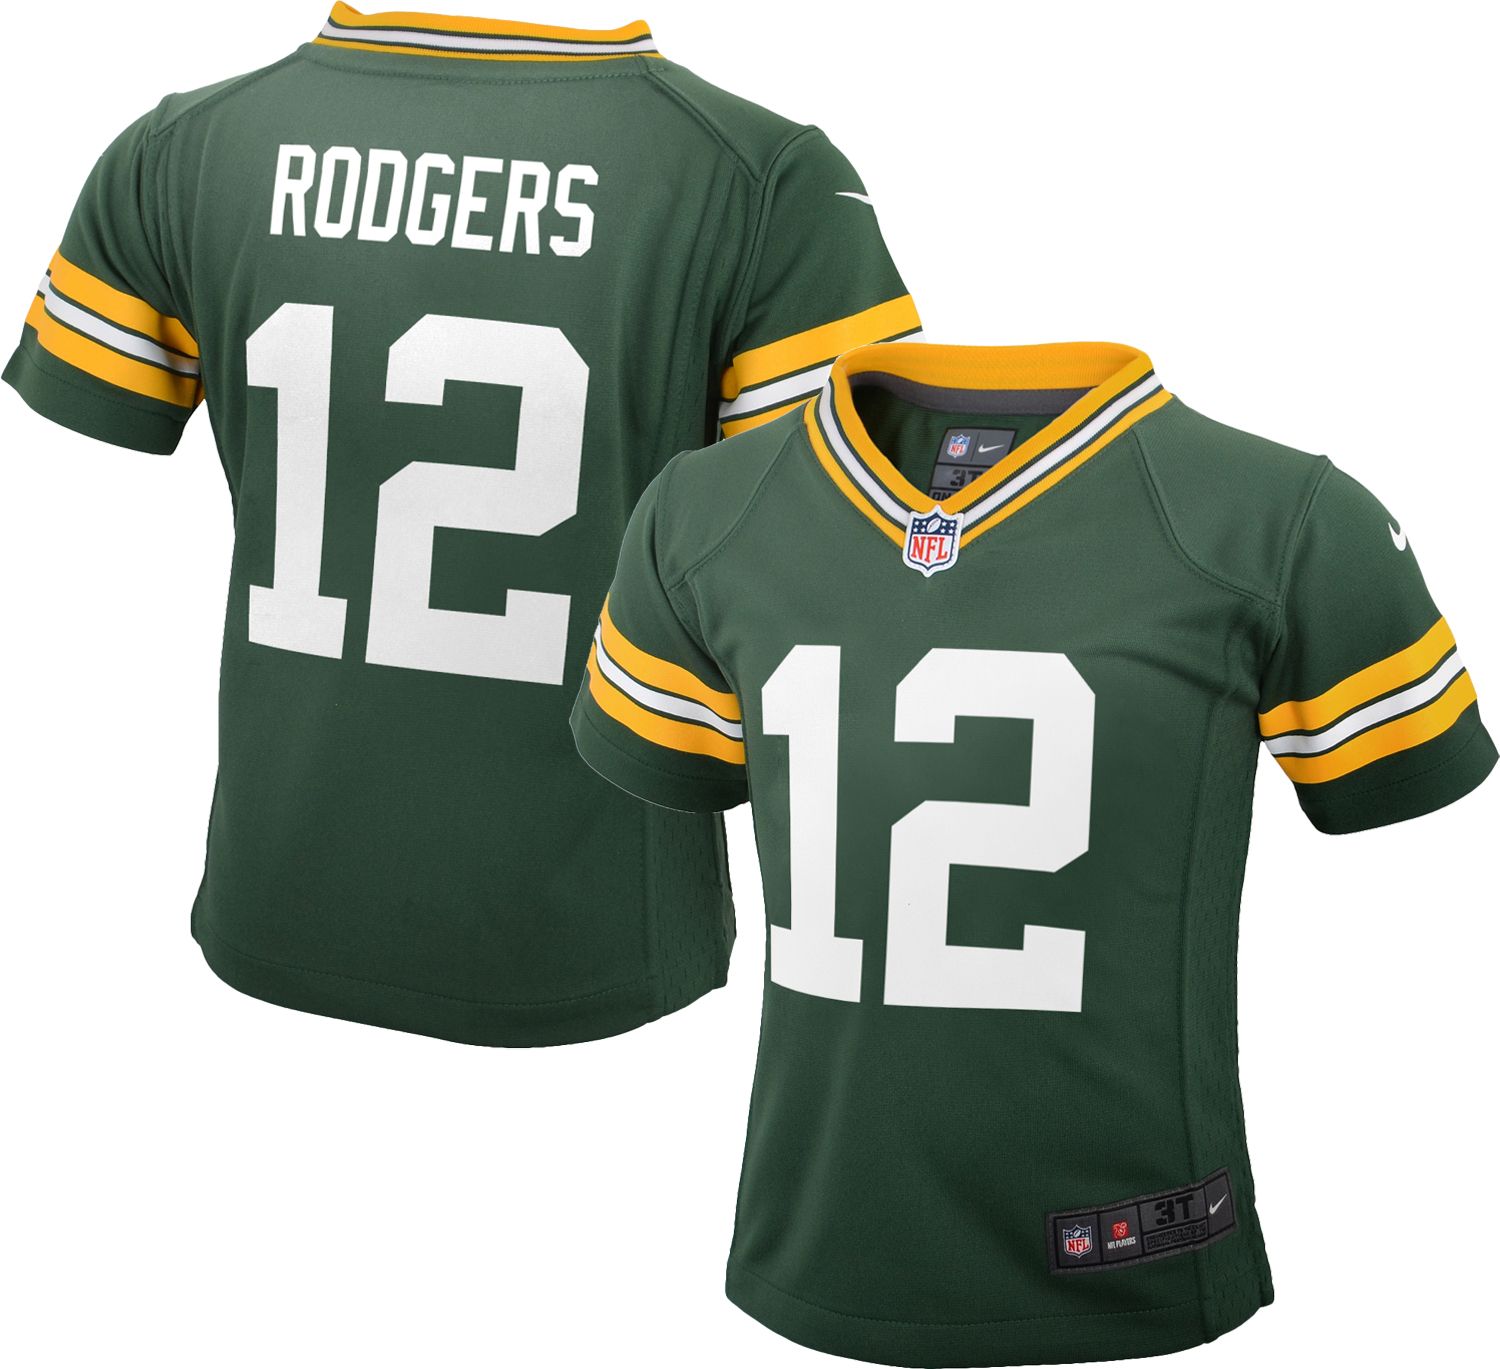 2t packers jersey